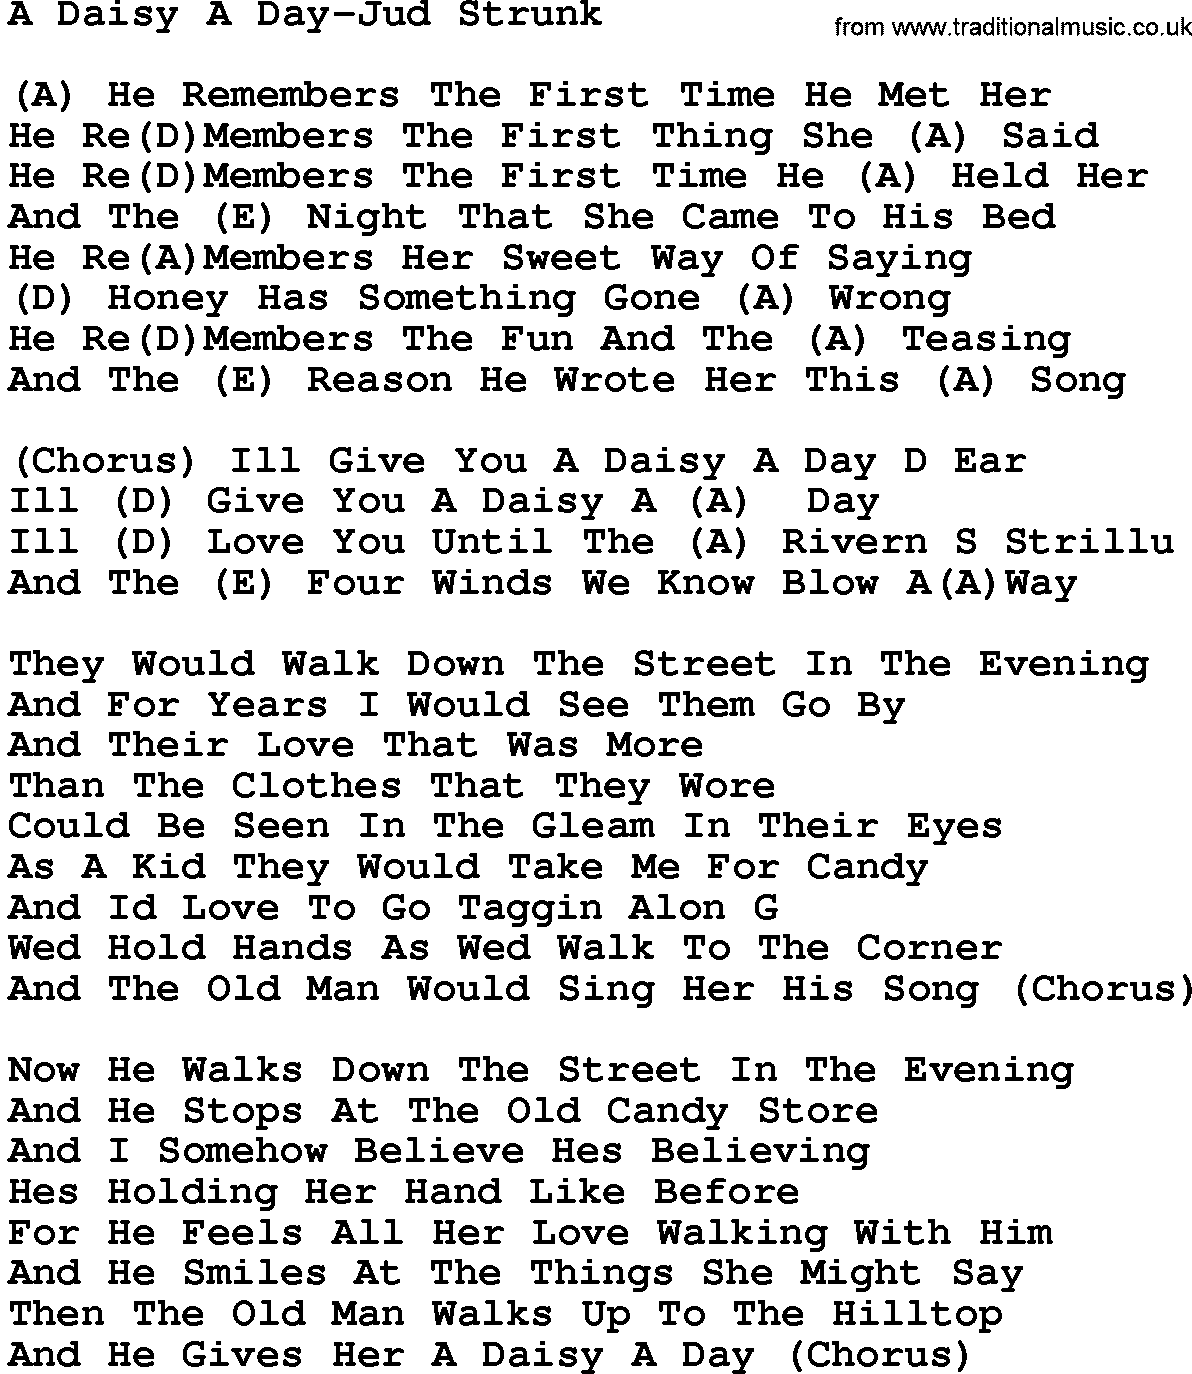 Country music song: A Daisy A Day-Jud Strunk lyrics and chords